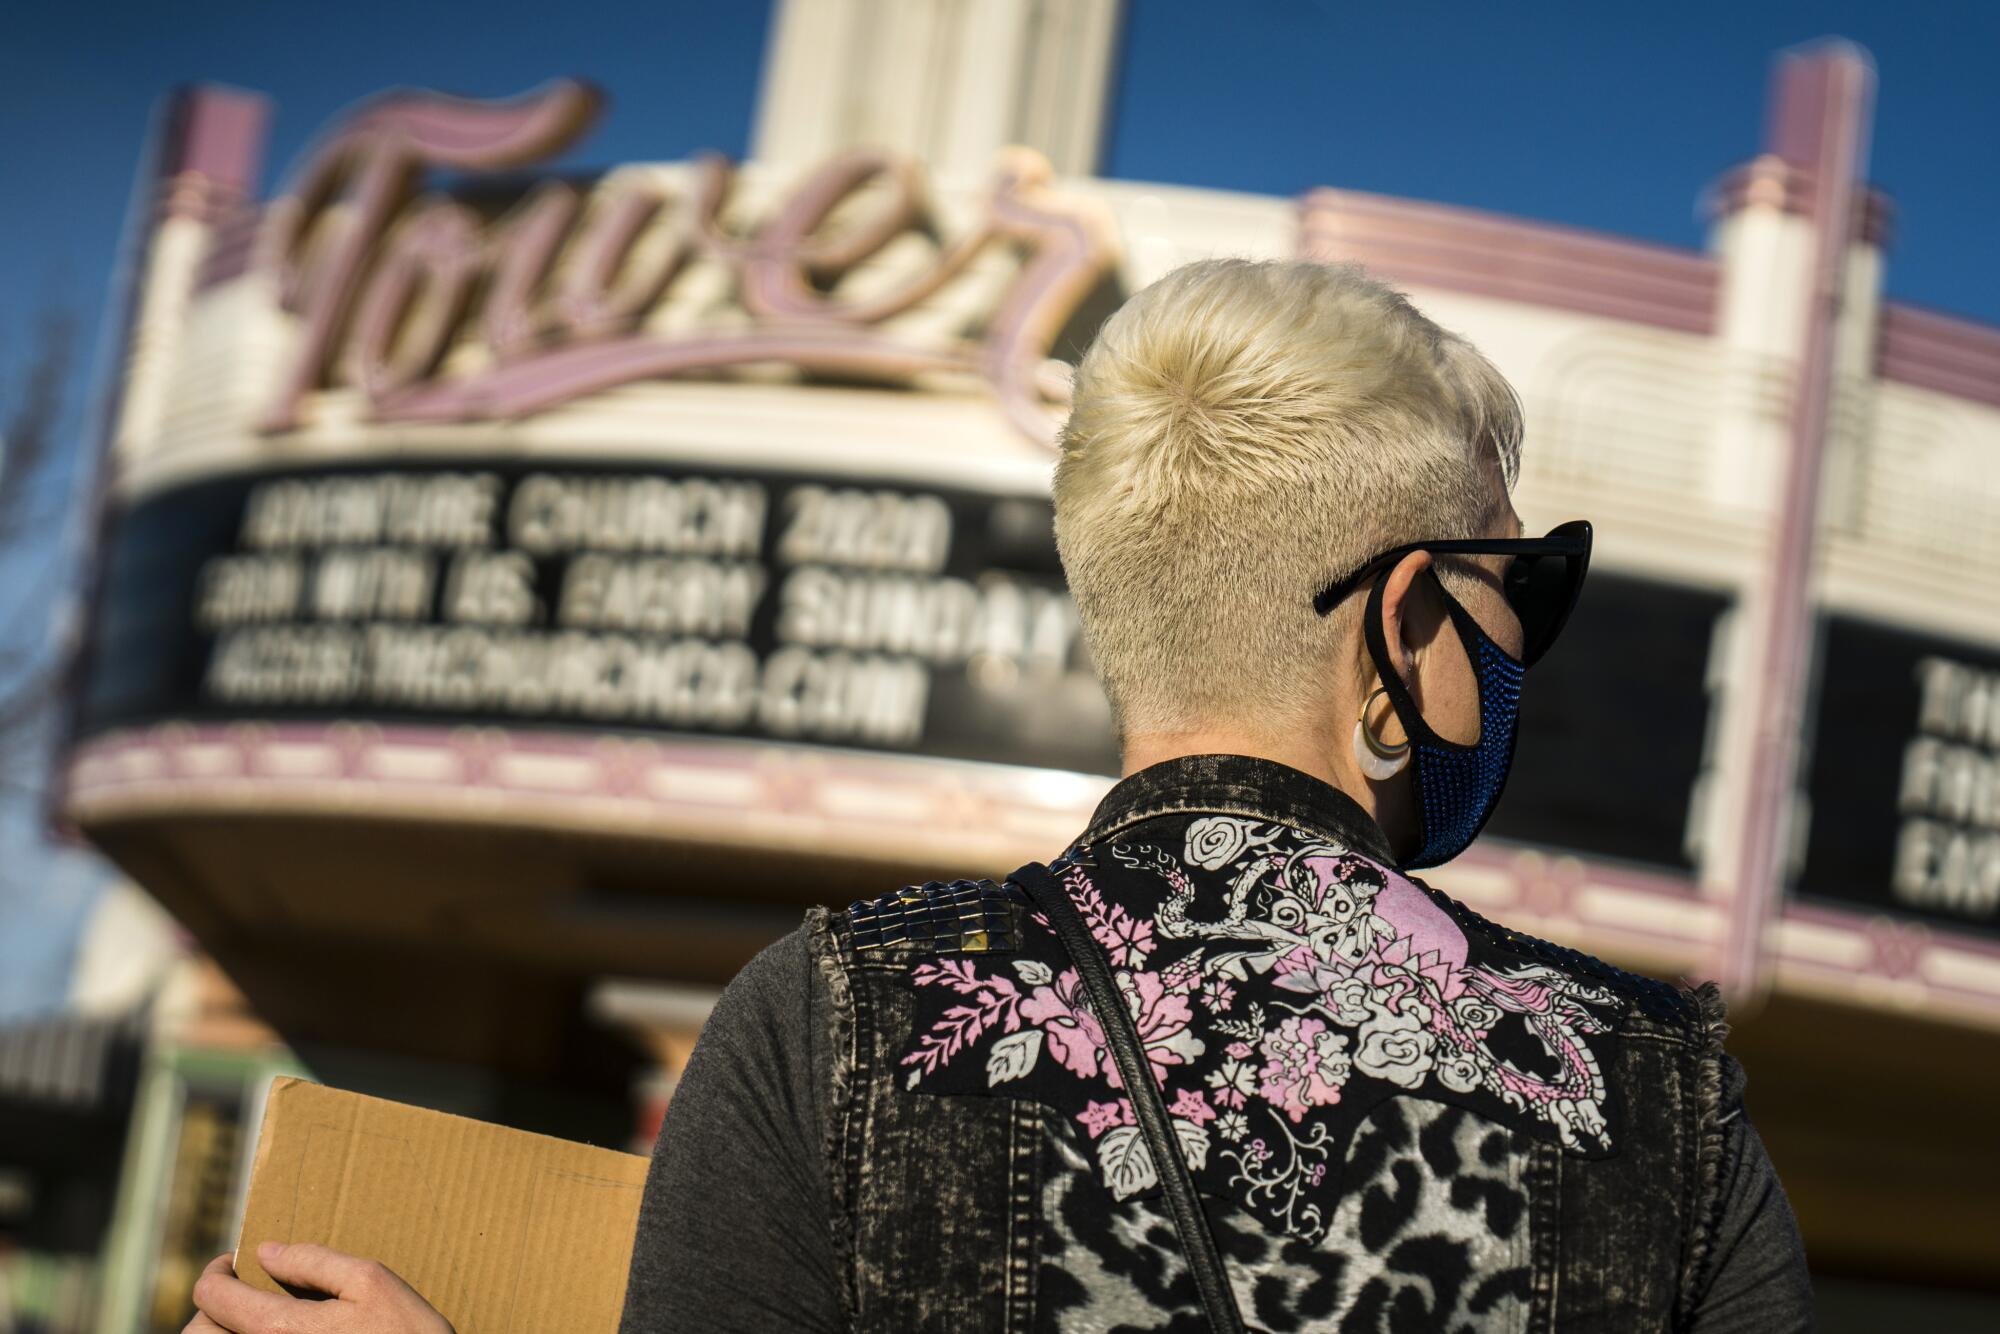 A woman holds a cardboard sign outside an Art Deco theater